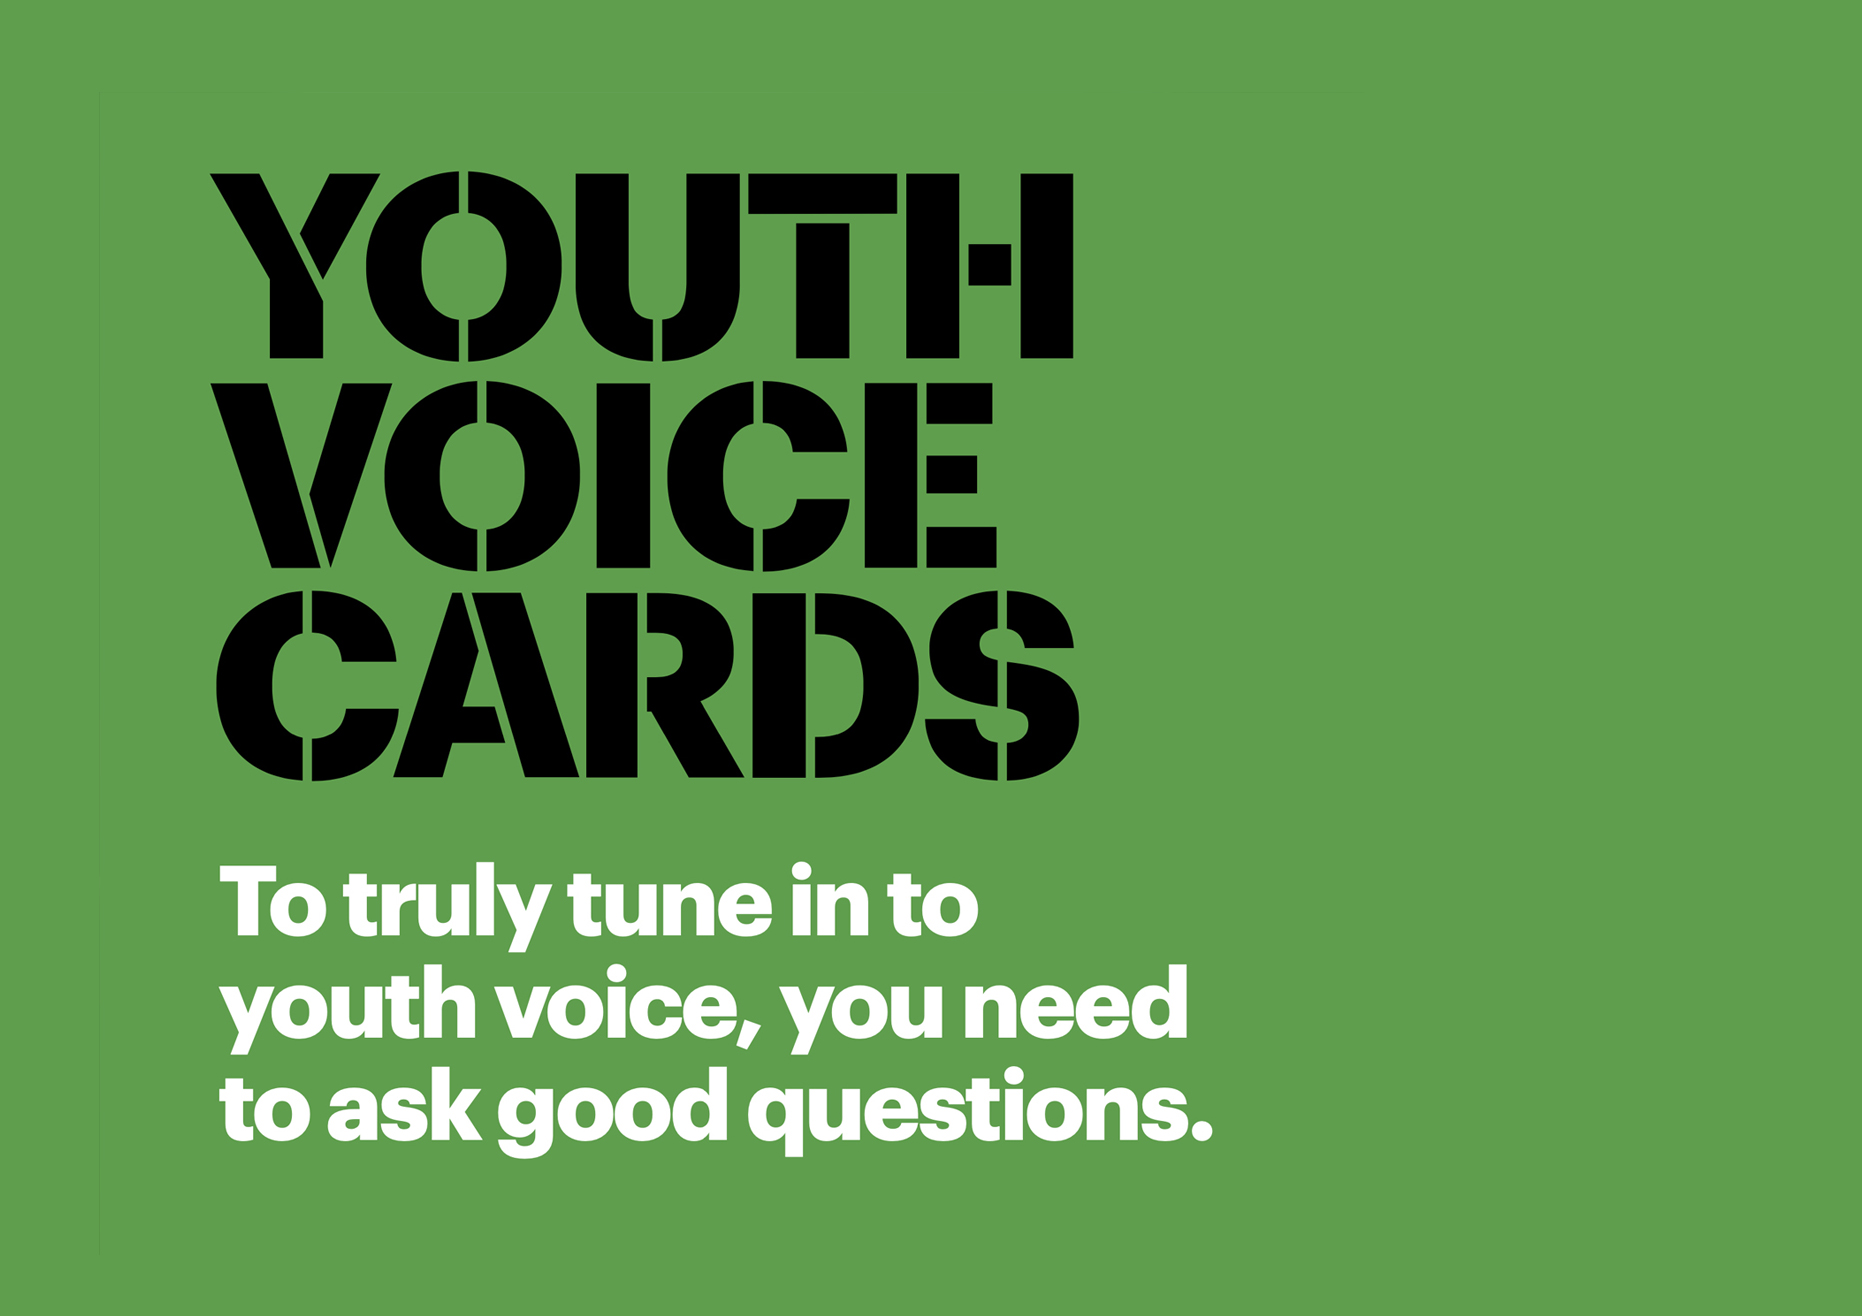 Youth Voice Cards